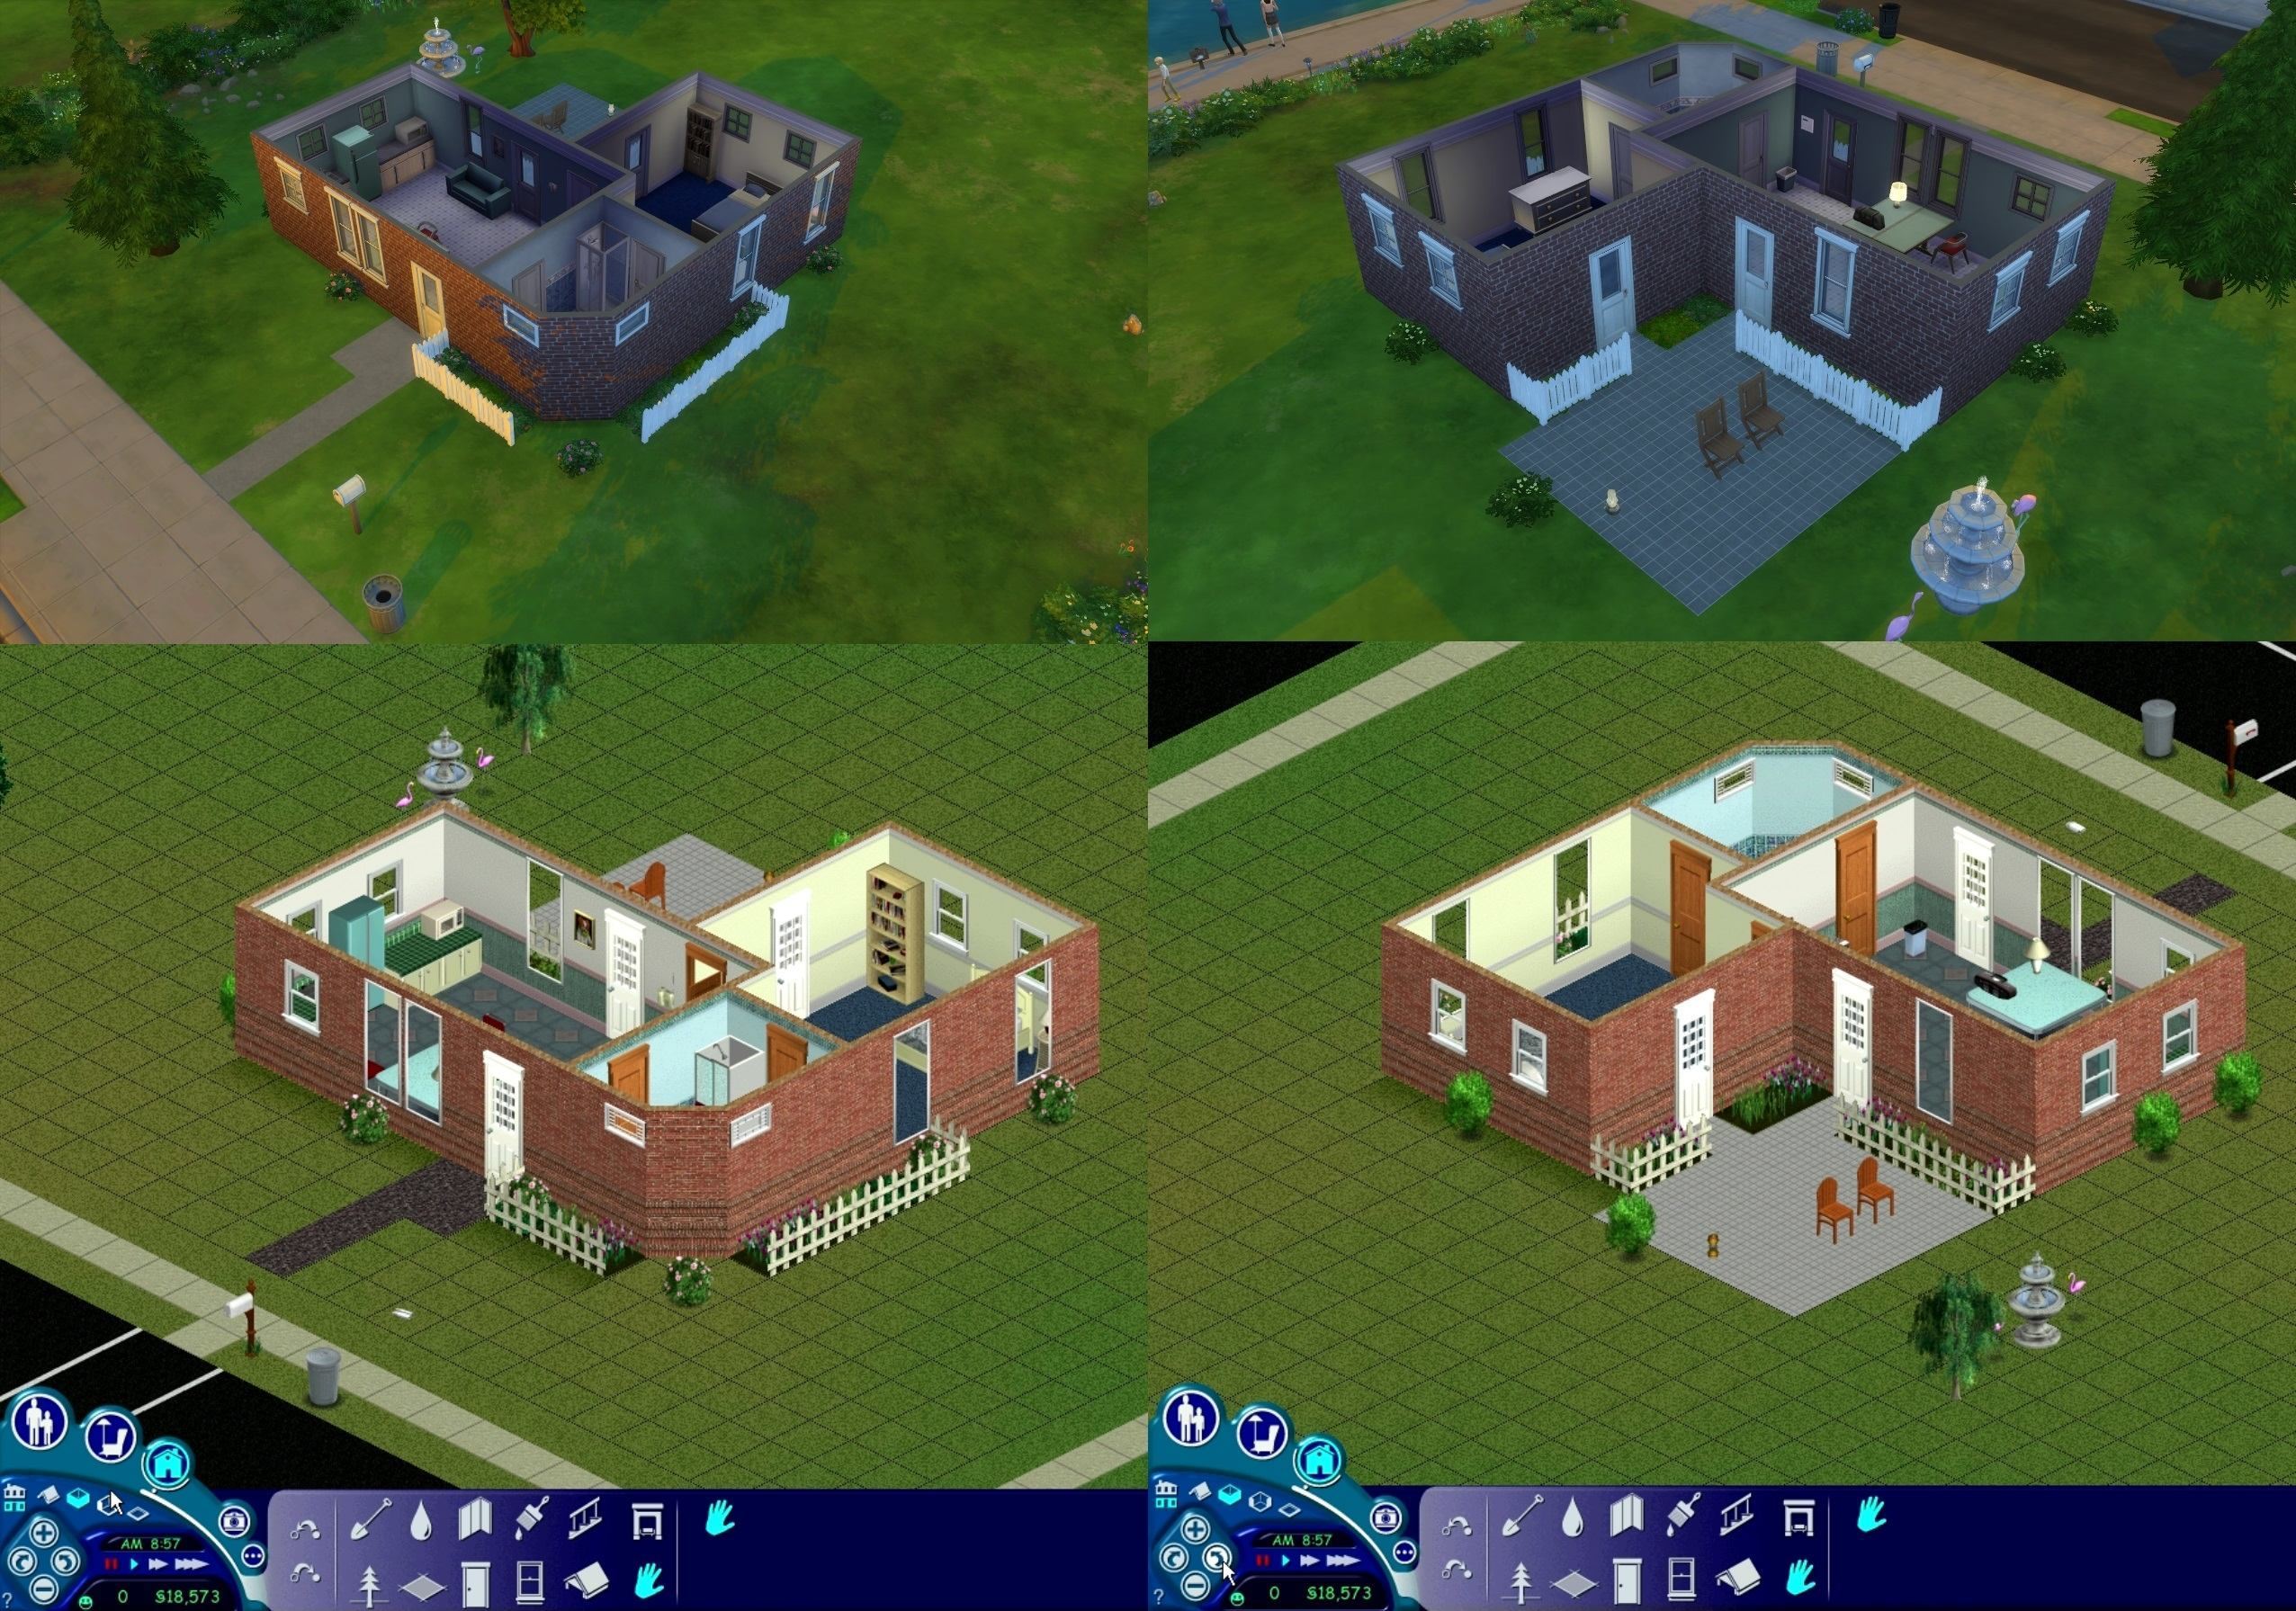 Sims 1 18. The SIMS 1. SIMS 1 дома. SIMS 1 город. The SIMS 1 DLC.